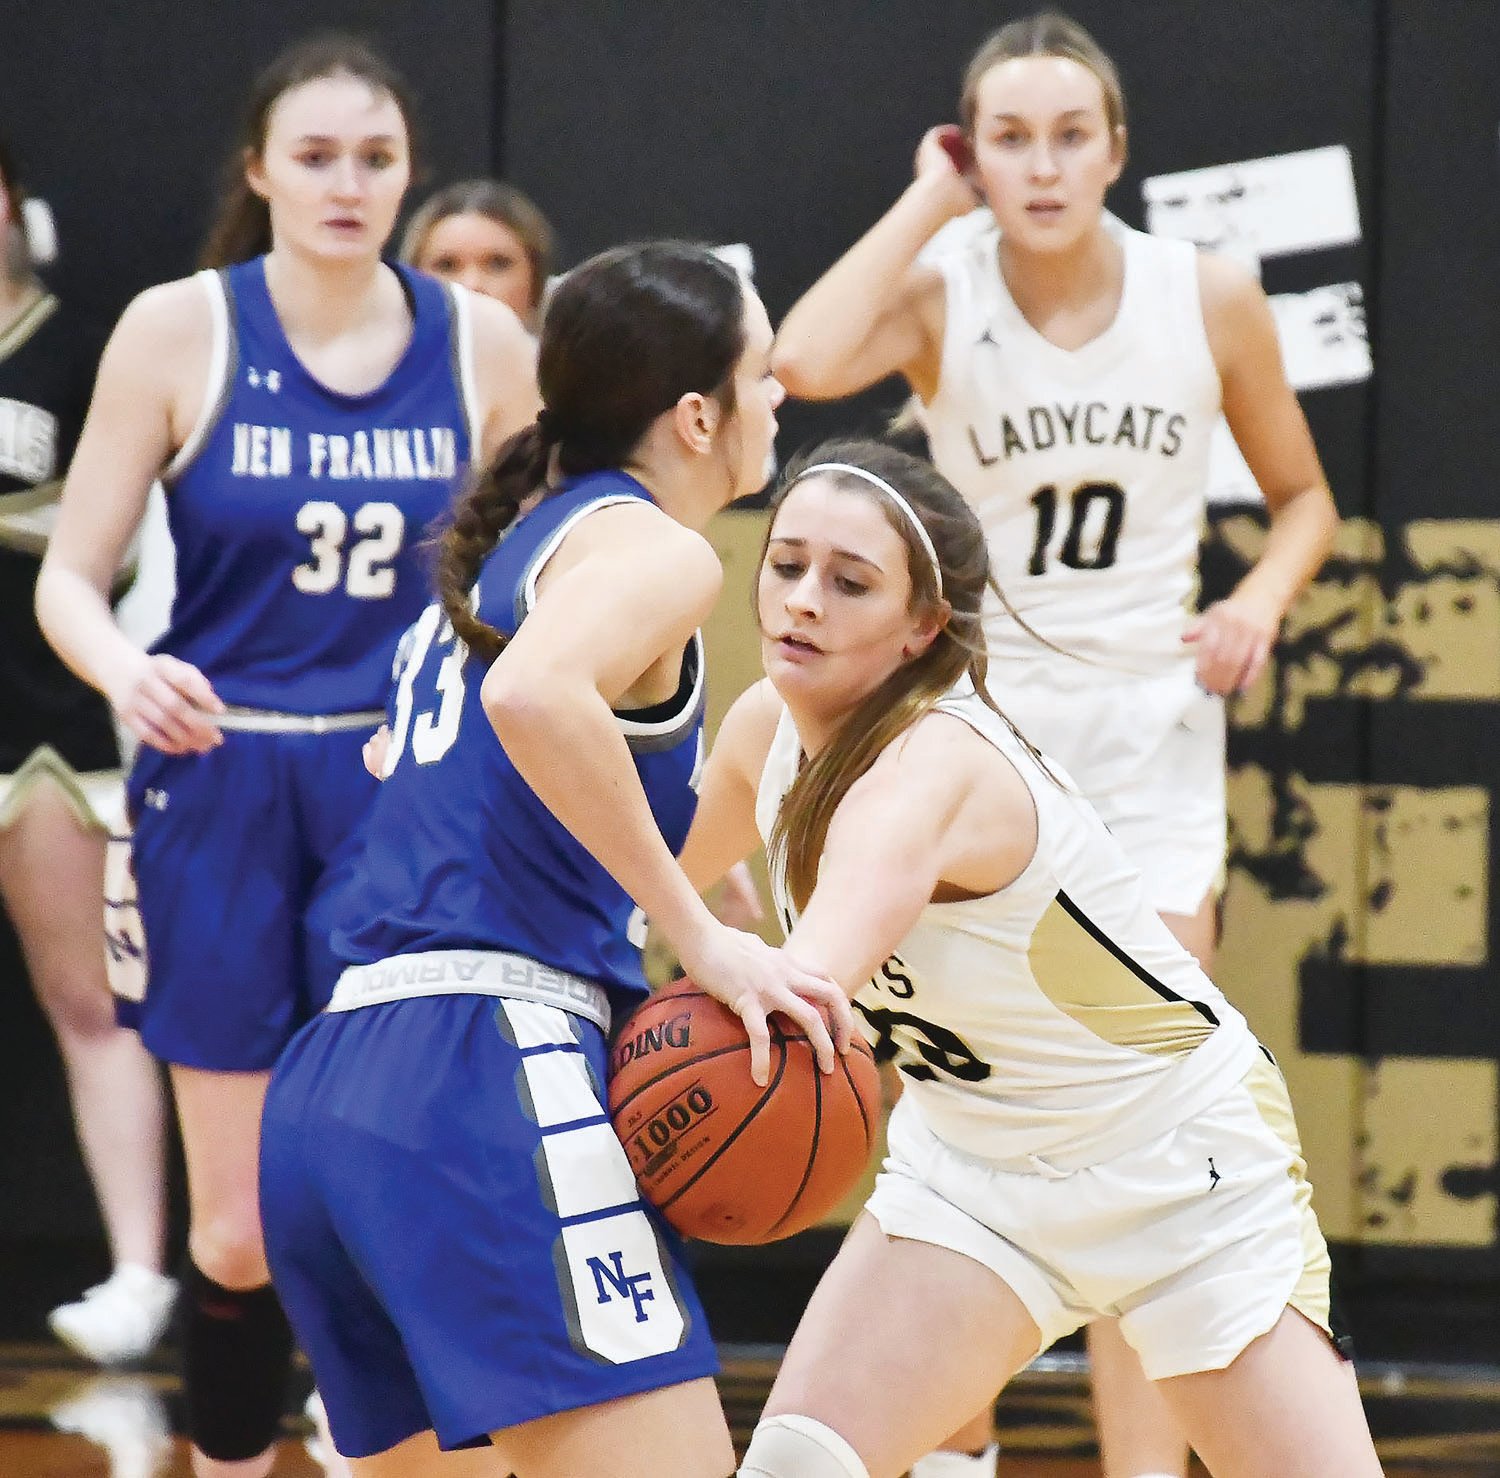 Cairo's Jersey Bailey pokes at the ball while playing defense as the Bearcats entertained New Franklin in a Central Activities Conference game Friday.